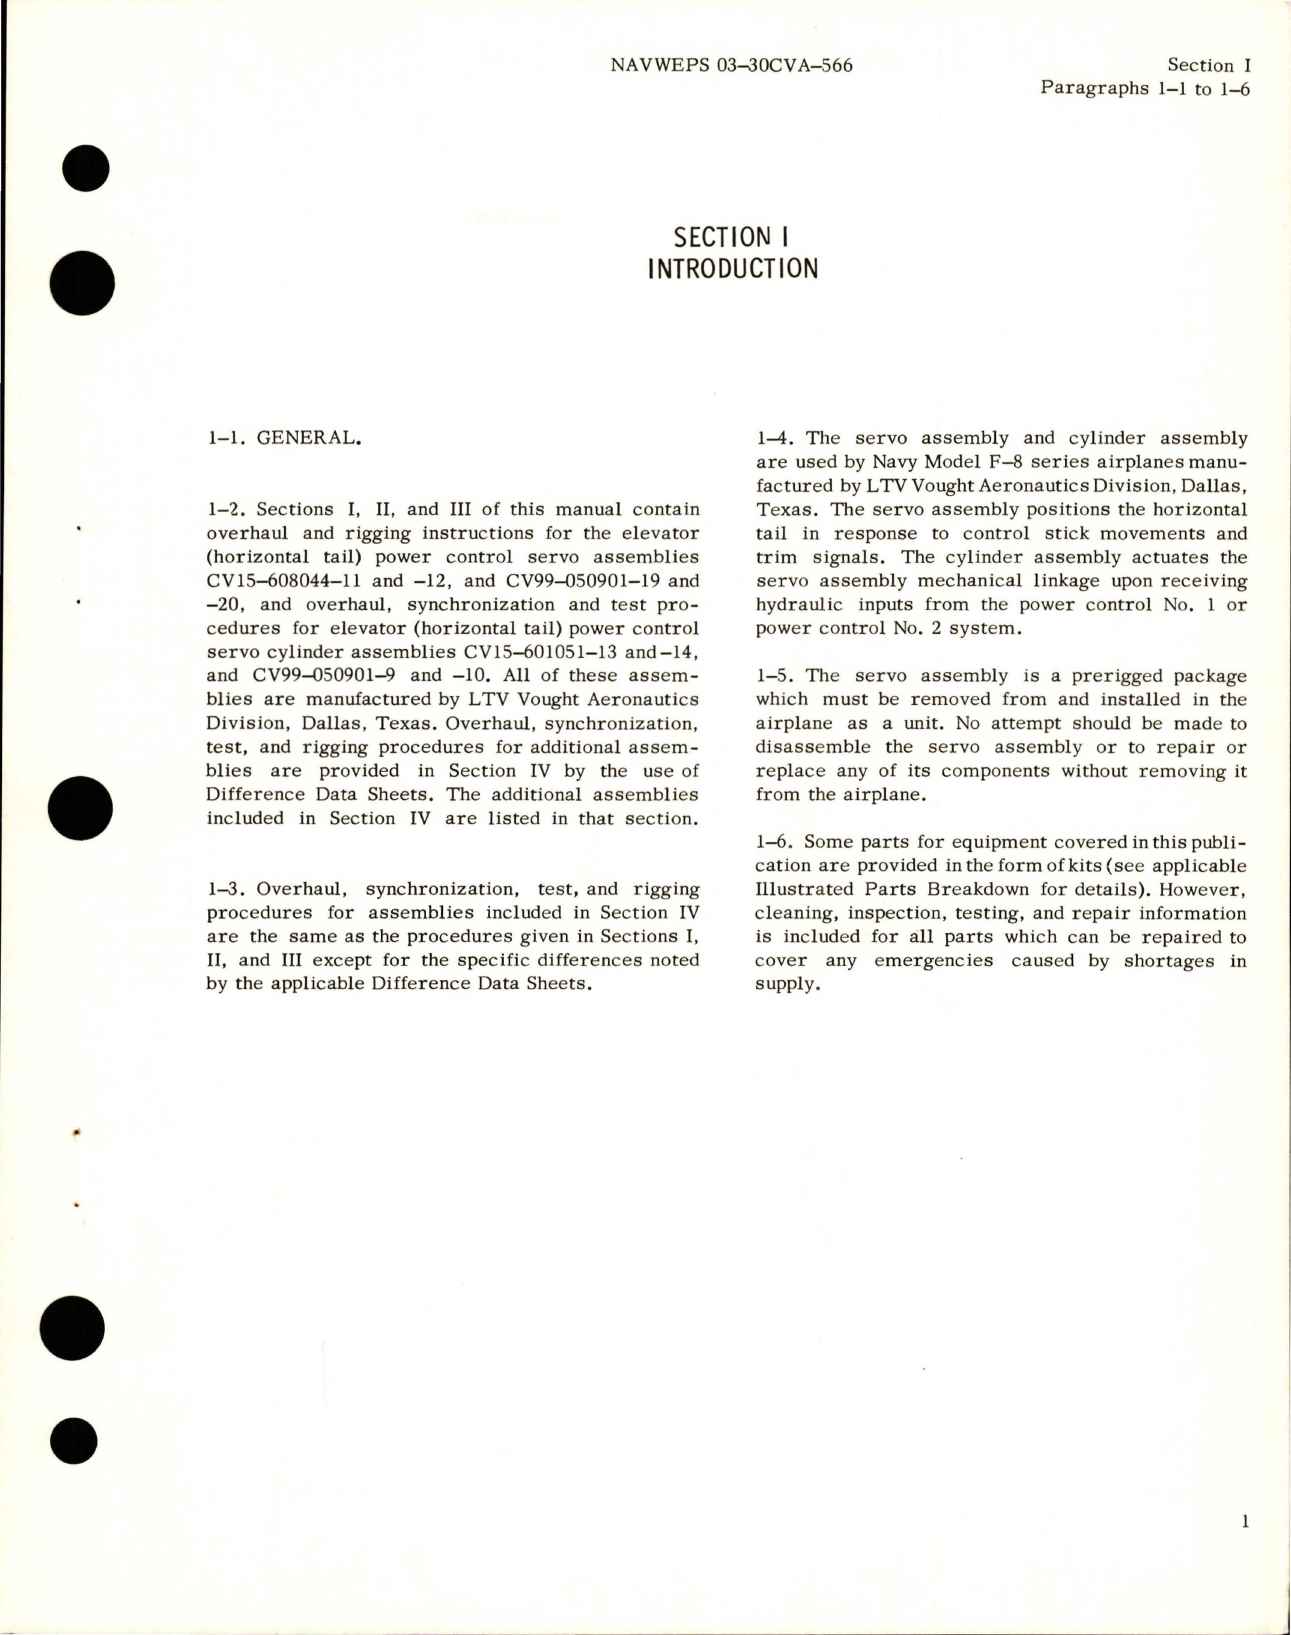 Sample page 5 from AirCorps Library document: Overhaul Instructions for Elevator (Horizontal Tail) Power Control Servo and Servo Cylinder Assembly